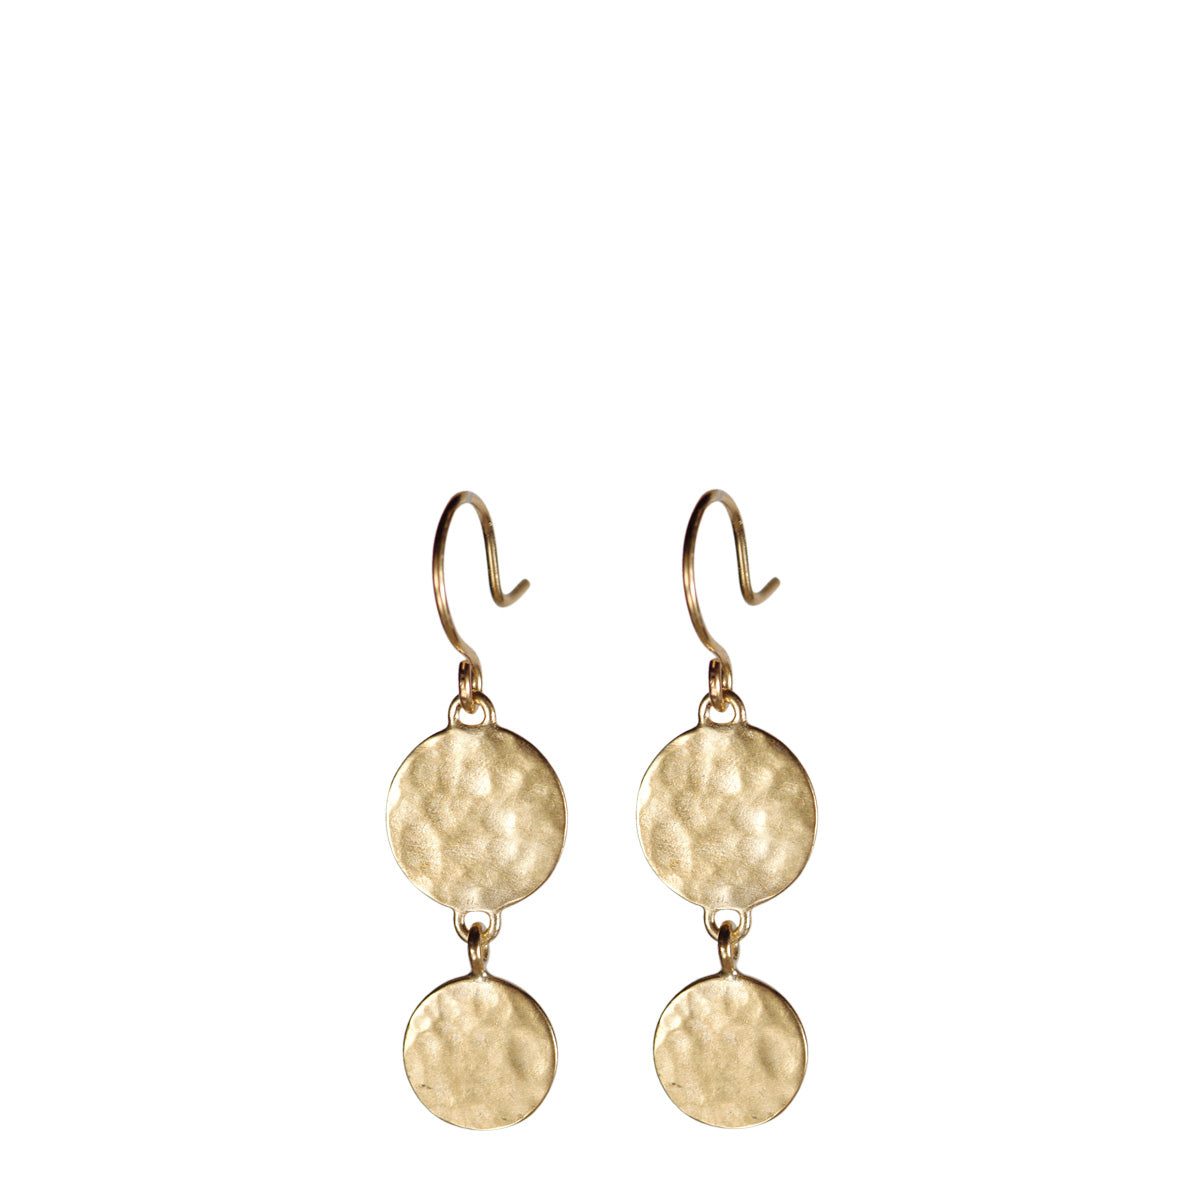 10K Gold Double Hammered Disc Drop Earrings